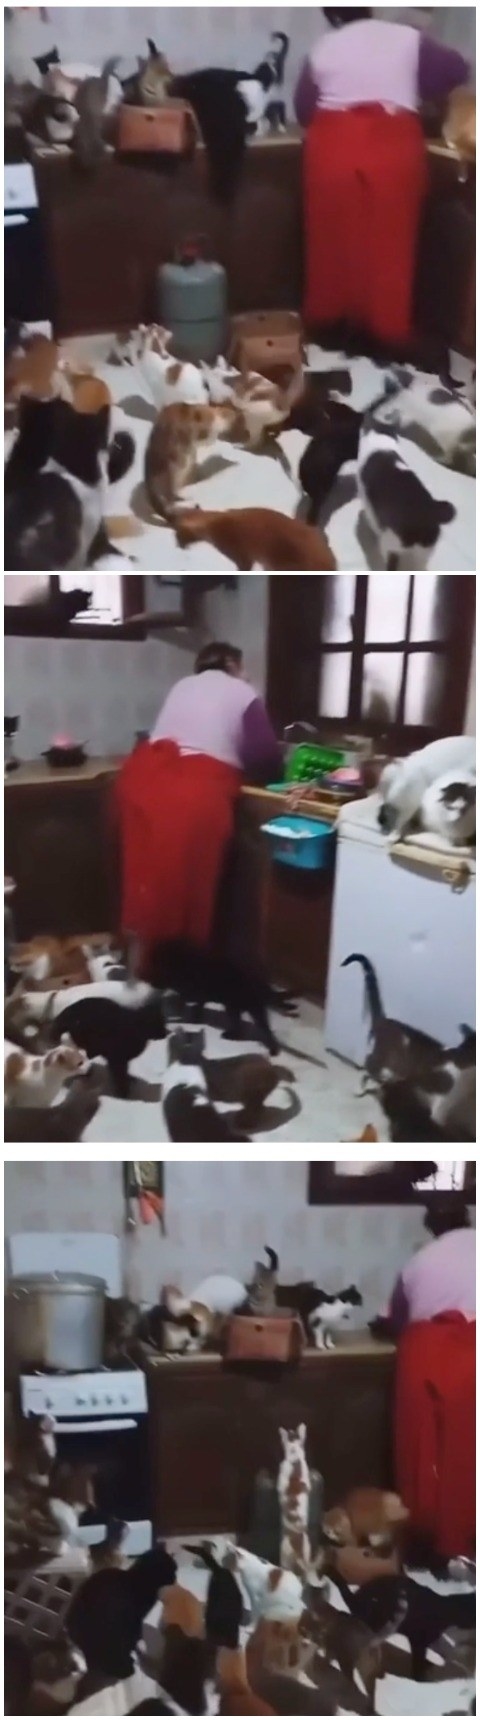 A woman cooking surrounded by many cats